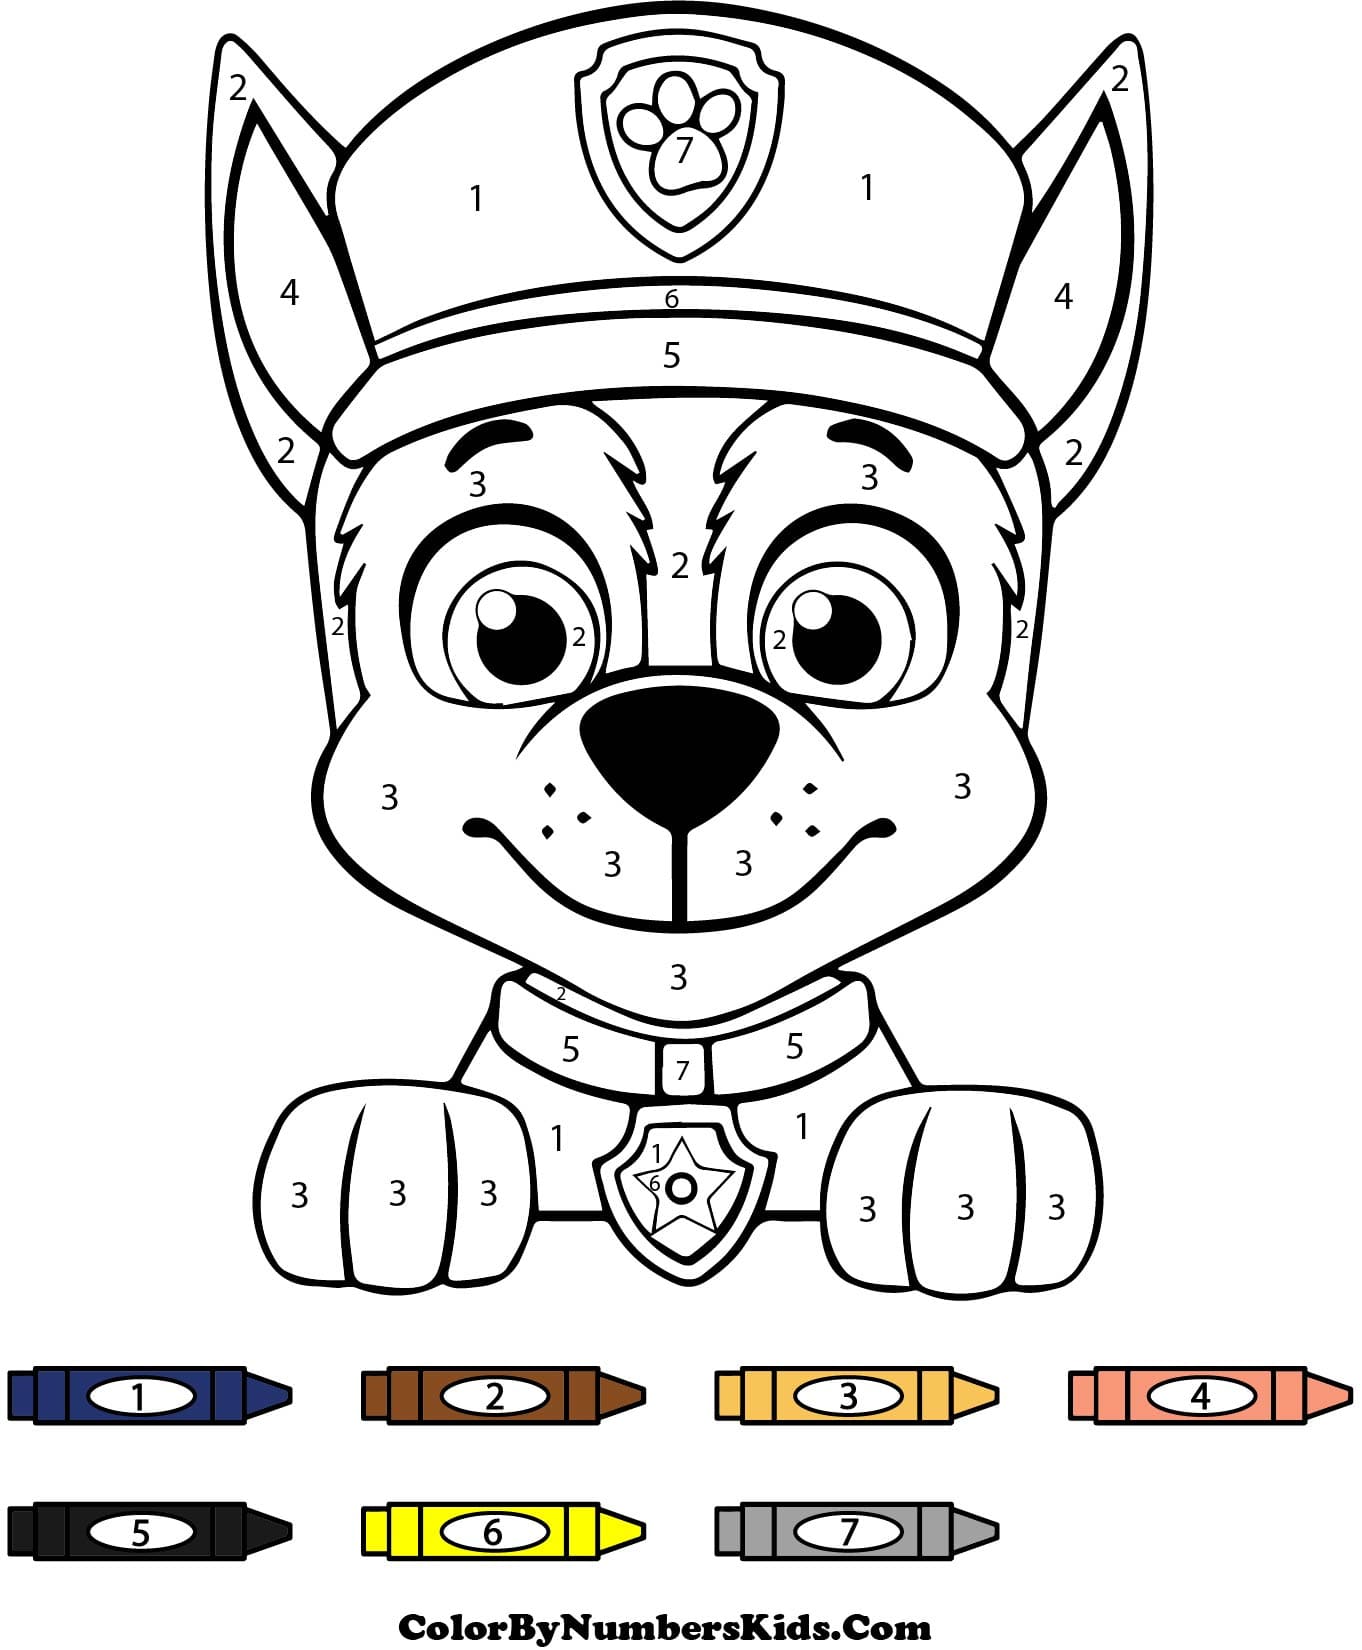 Chase Paw Patrol Color By Number